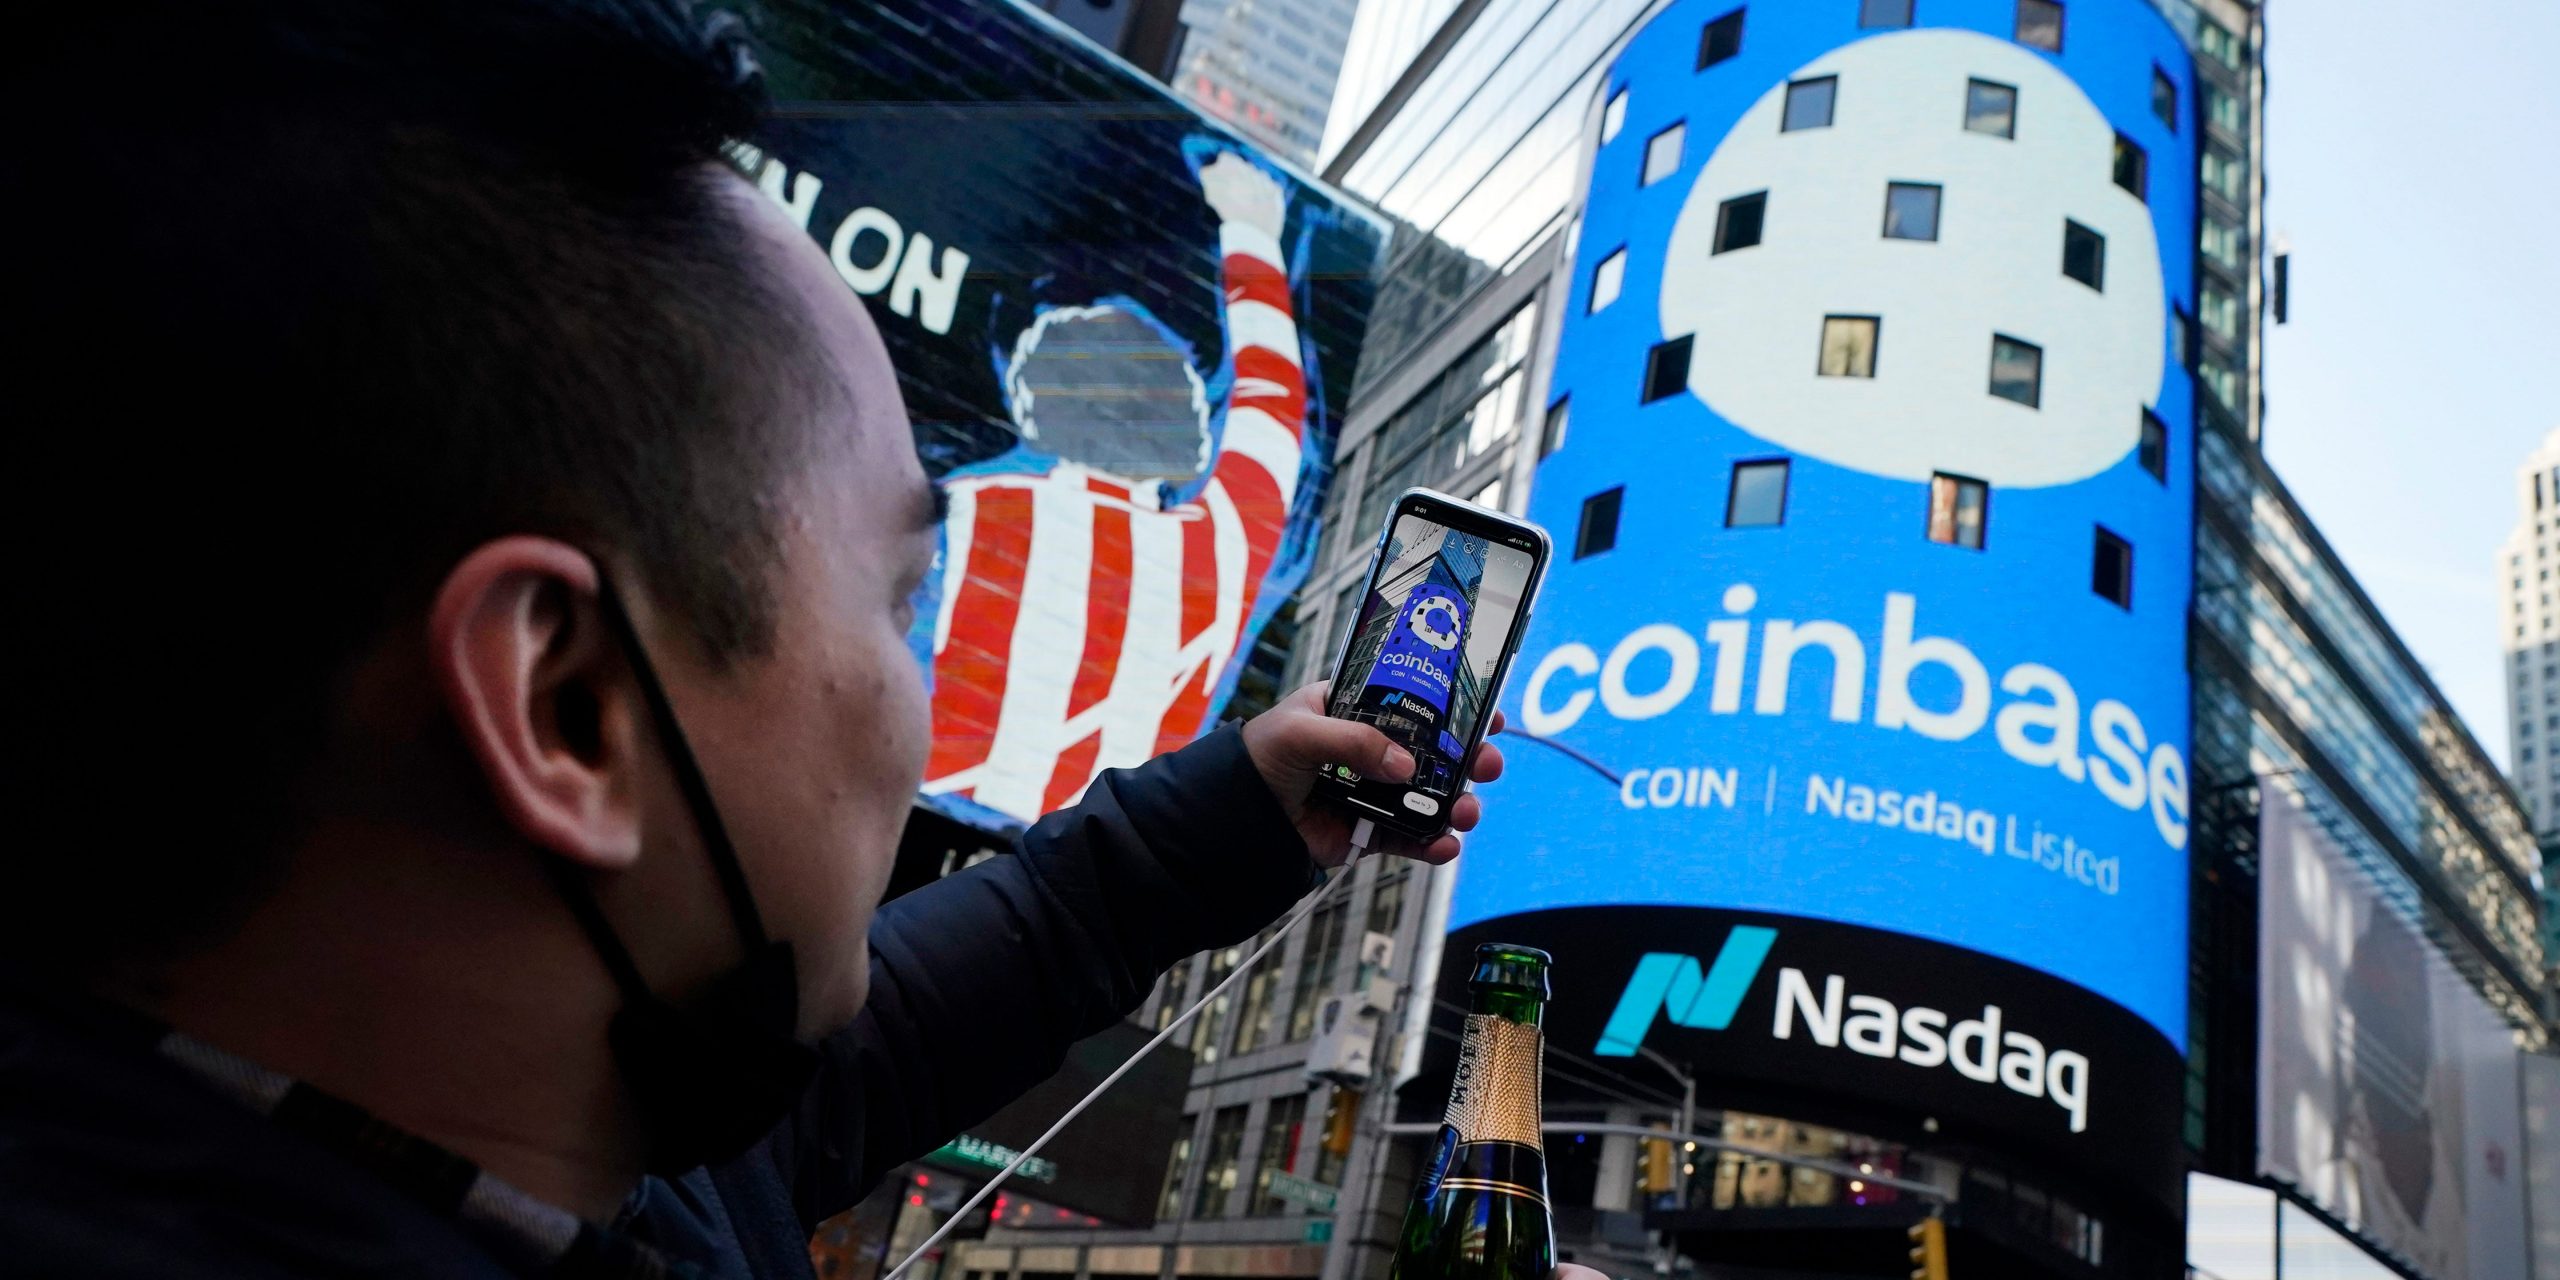 Coinbase employee Daniel Huynh holds a celebratory bottle of champagne as he photographs outside the Nasdaq MarketSite, in New York's Times Square, Wednesday, April 14, 2021.